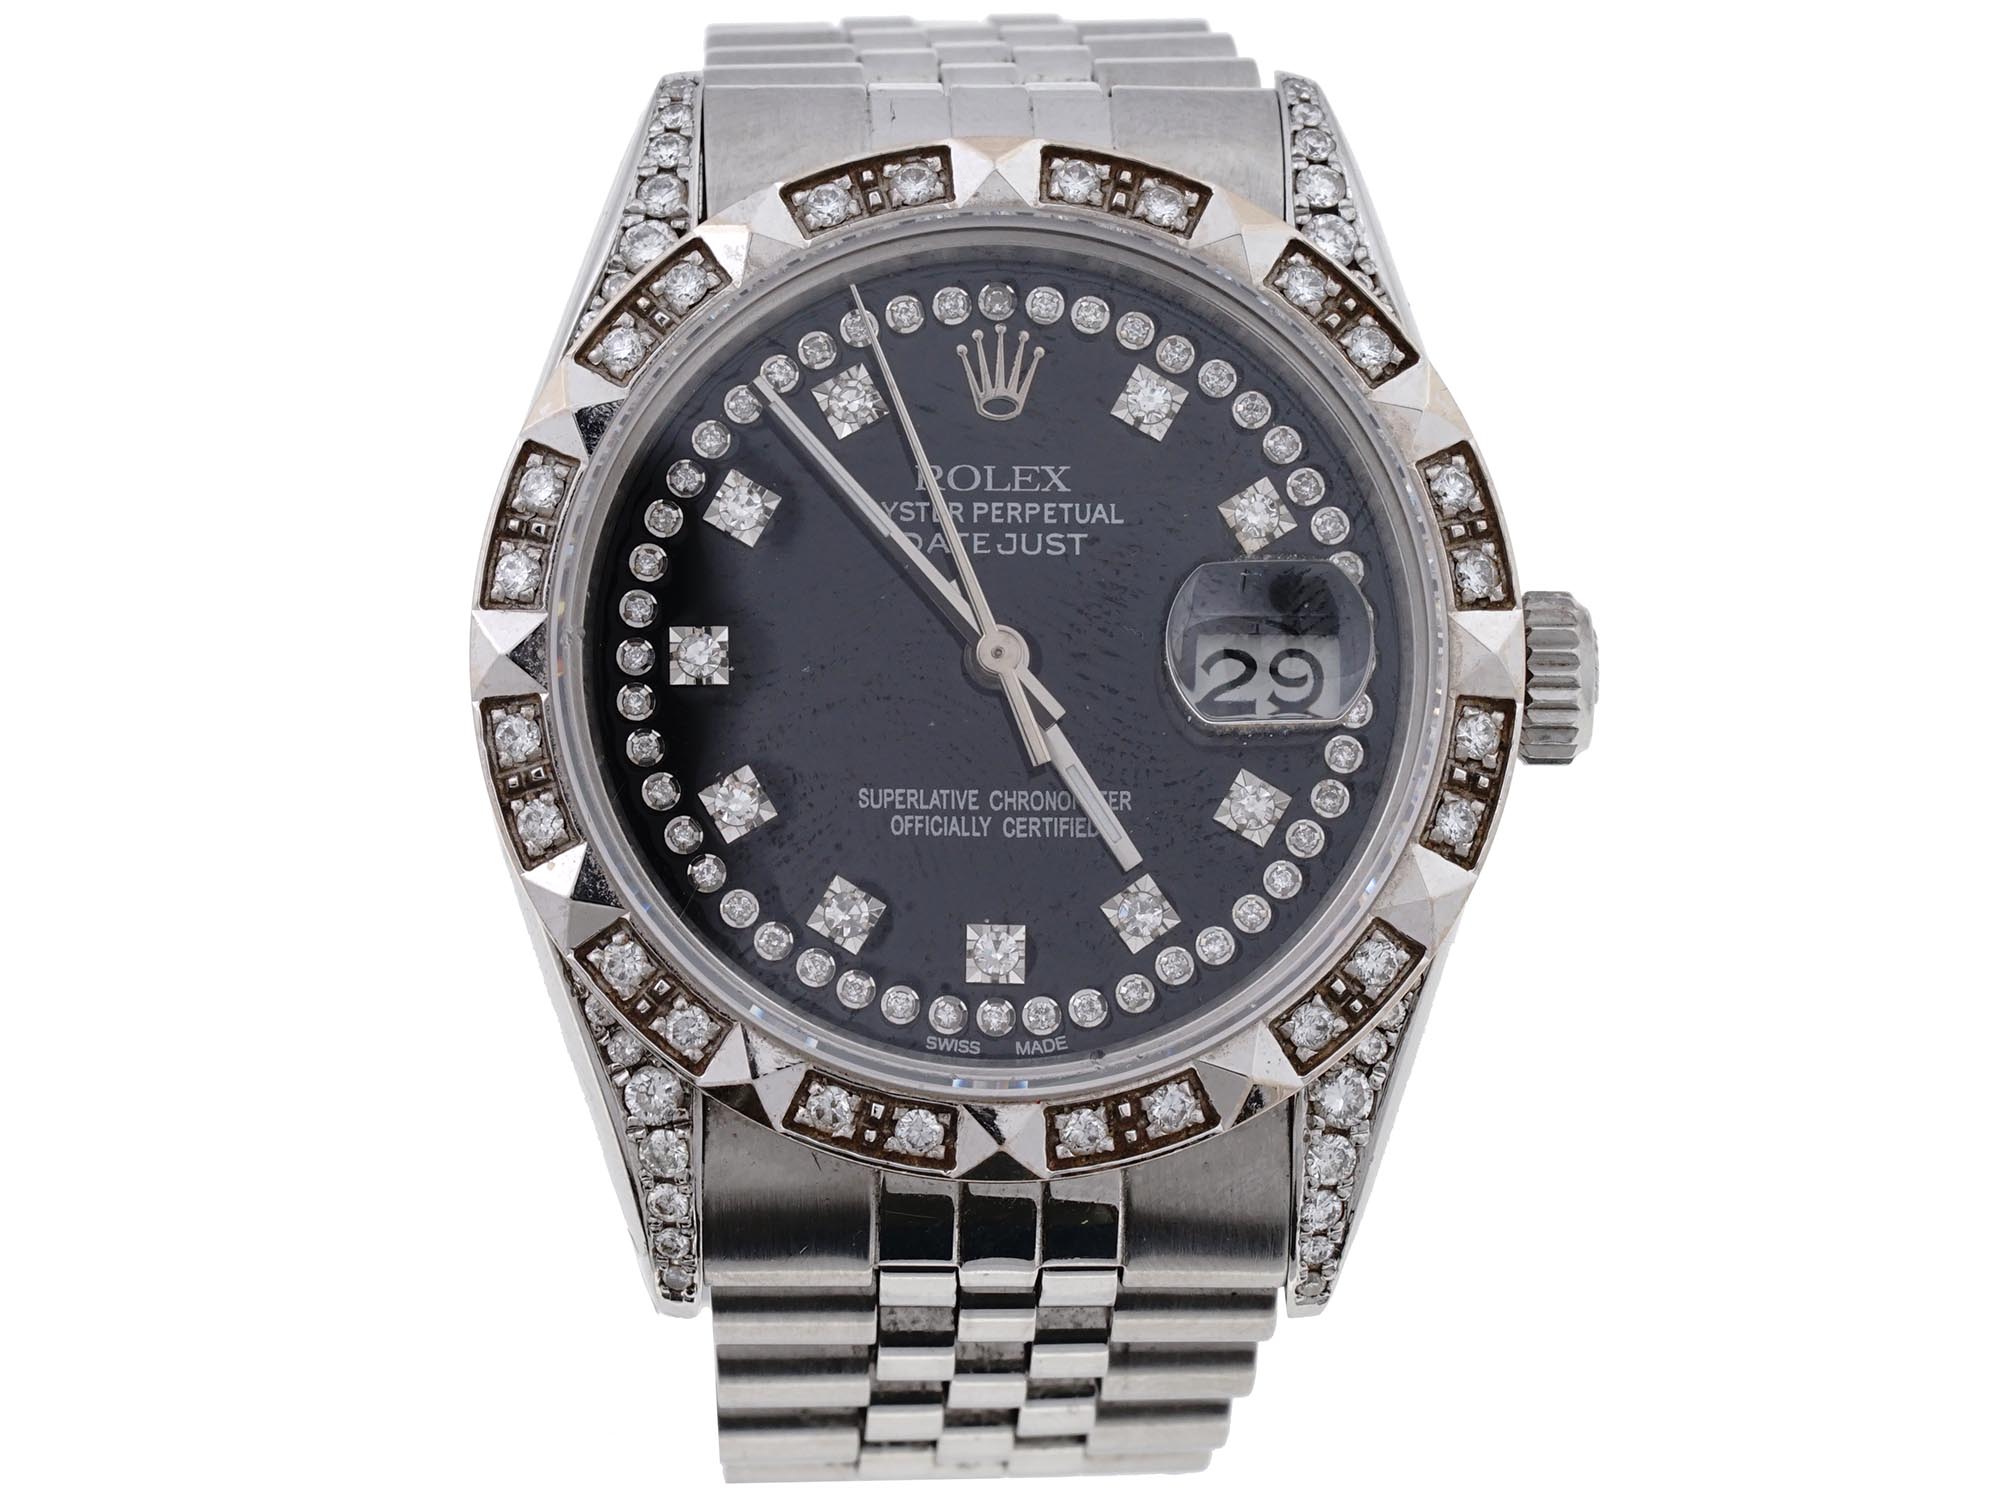 ROLEX OYSTER PERPETUAL DATEJUST DIAMOND WATCH PIC-1